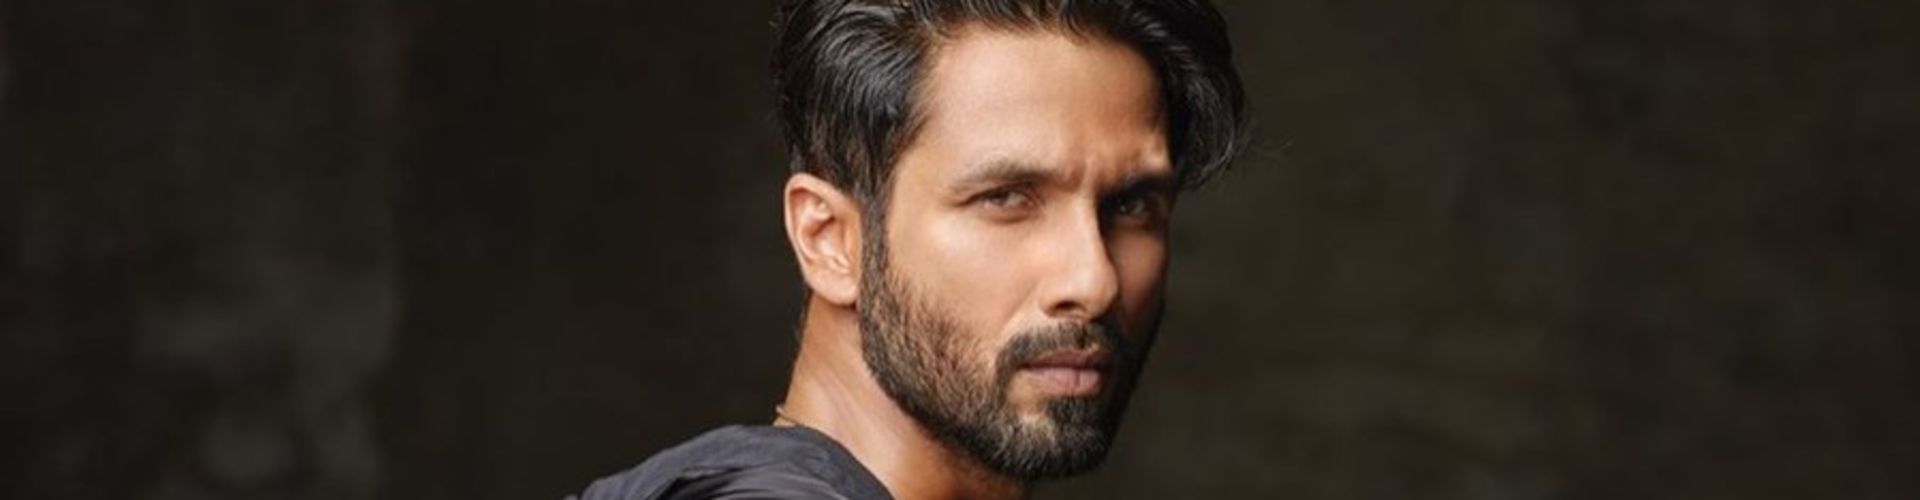 Plan To Do More Accessible Films Says Shahid Kapoor